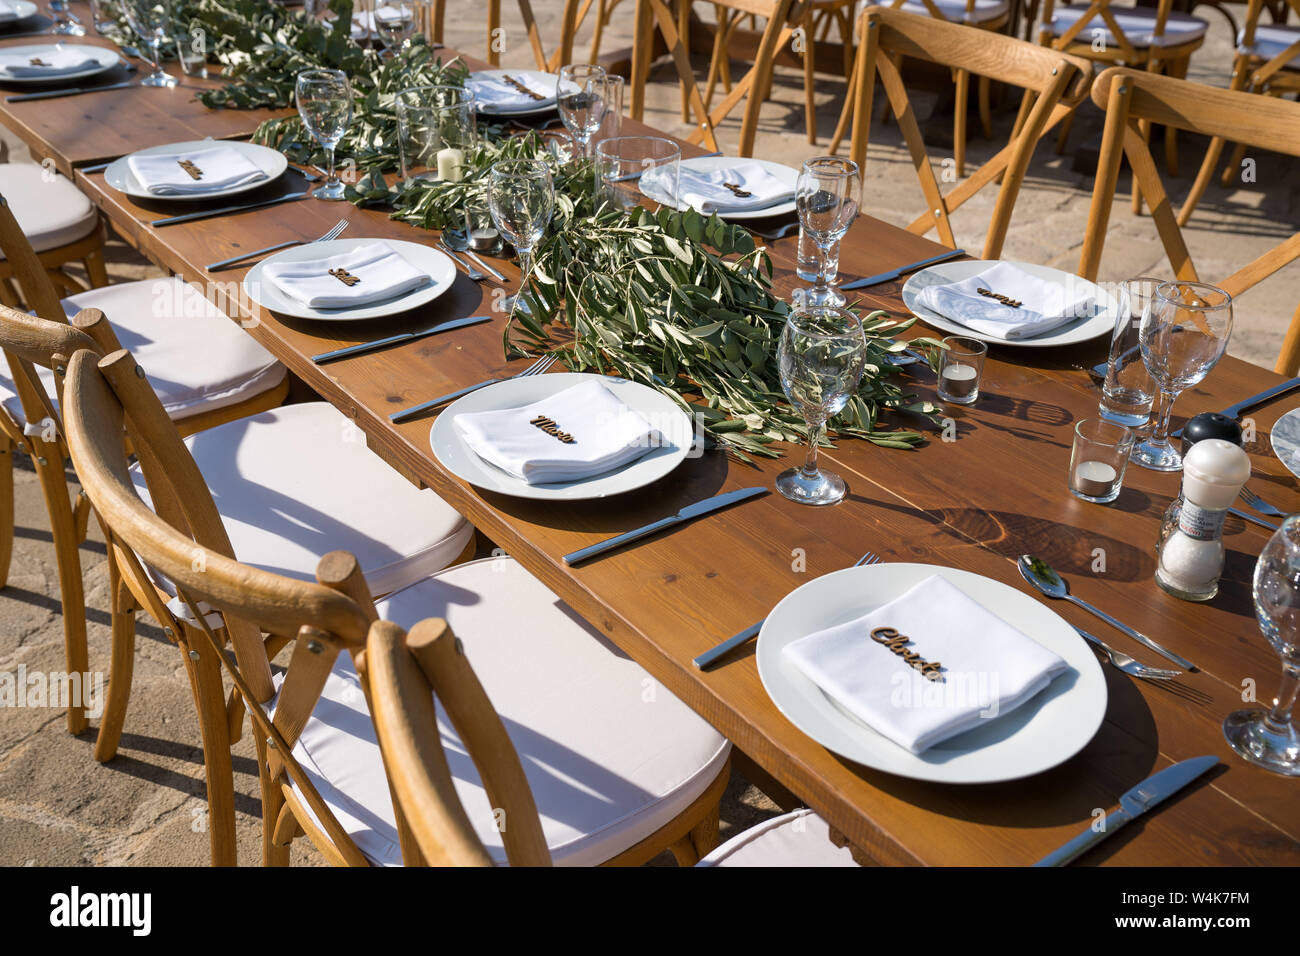 Greek Cypriot Traditional Wedding Table Decorations at the Wedding Venue  Stock Photo - Alamy